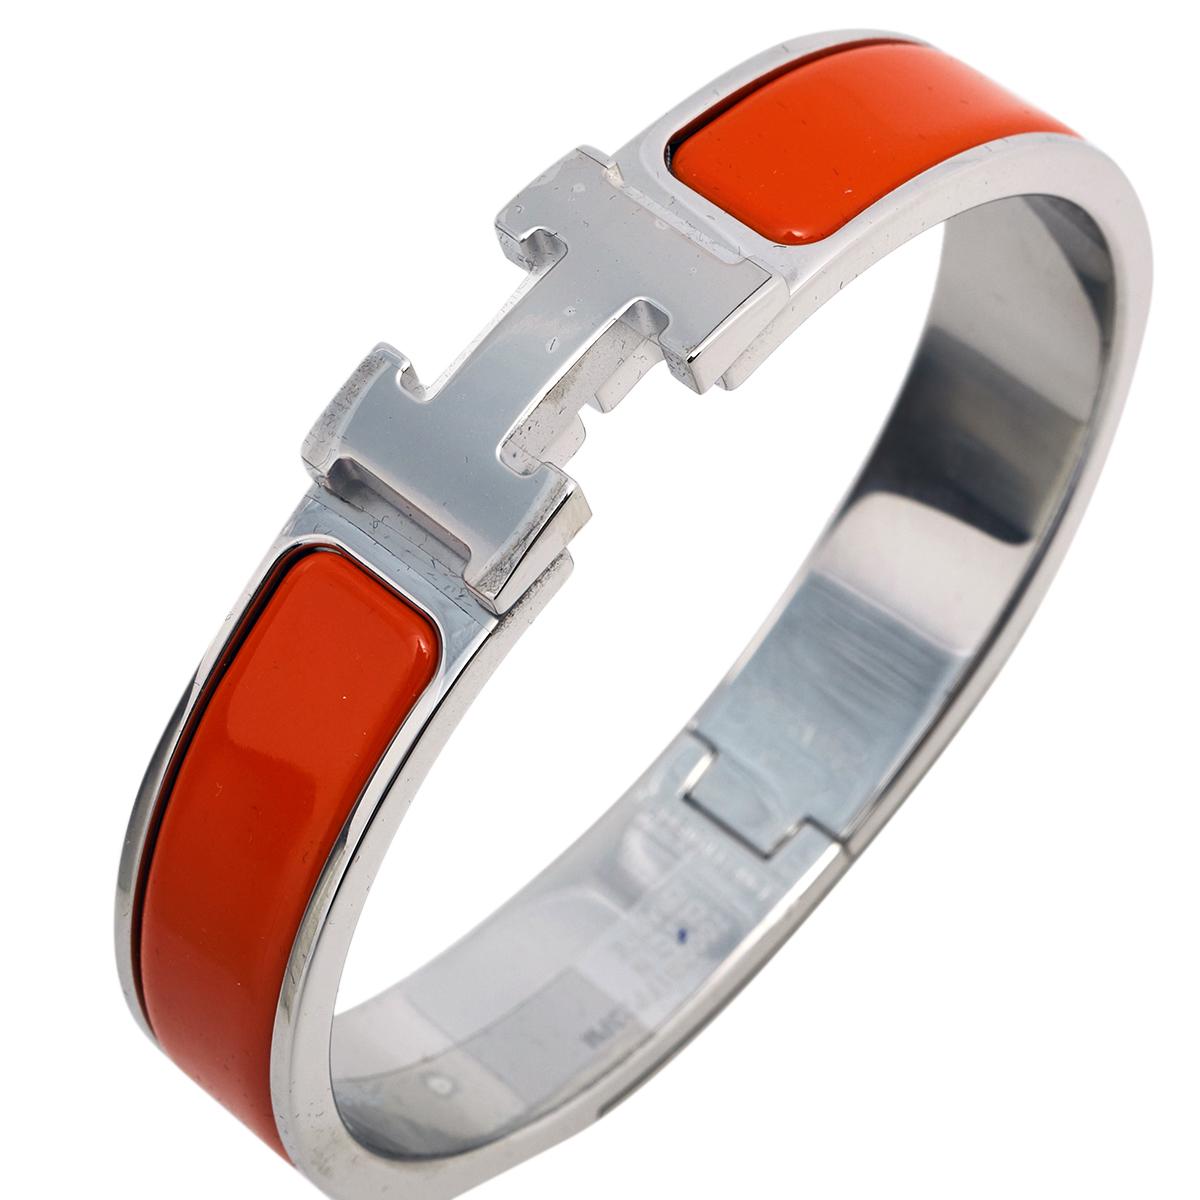 This bracelet embodies Hermès’ elegant craftsmanship with its palladium-plated metal body and white enamel inlay. Featuring the iconic H logo of the fashion house at the front, this bracelet is the accessory to buy today!

Includes: Original